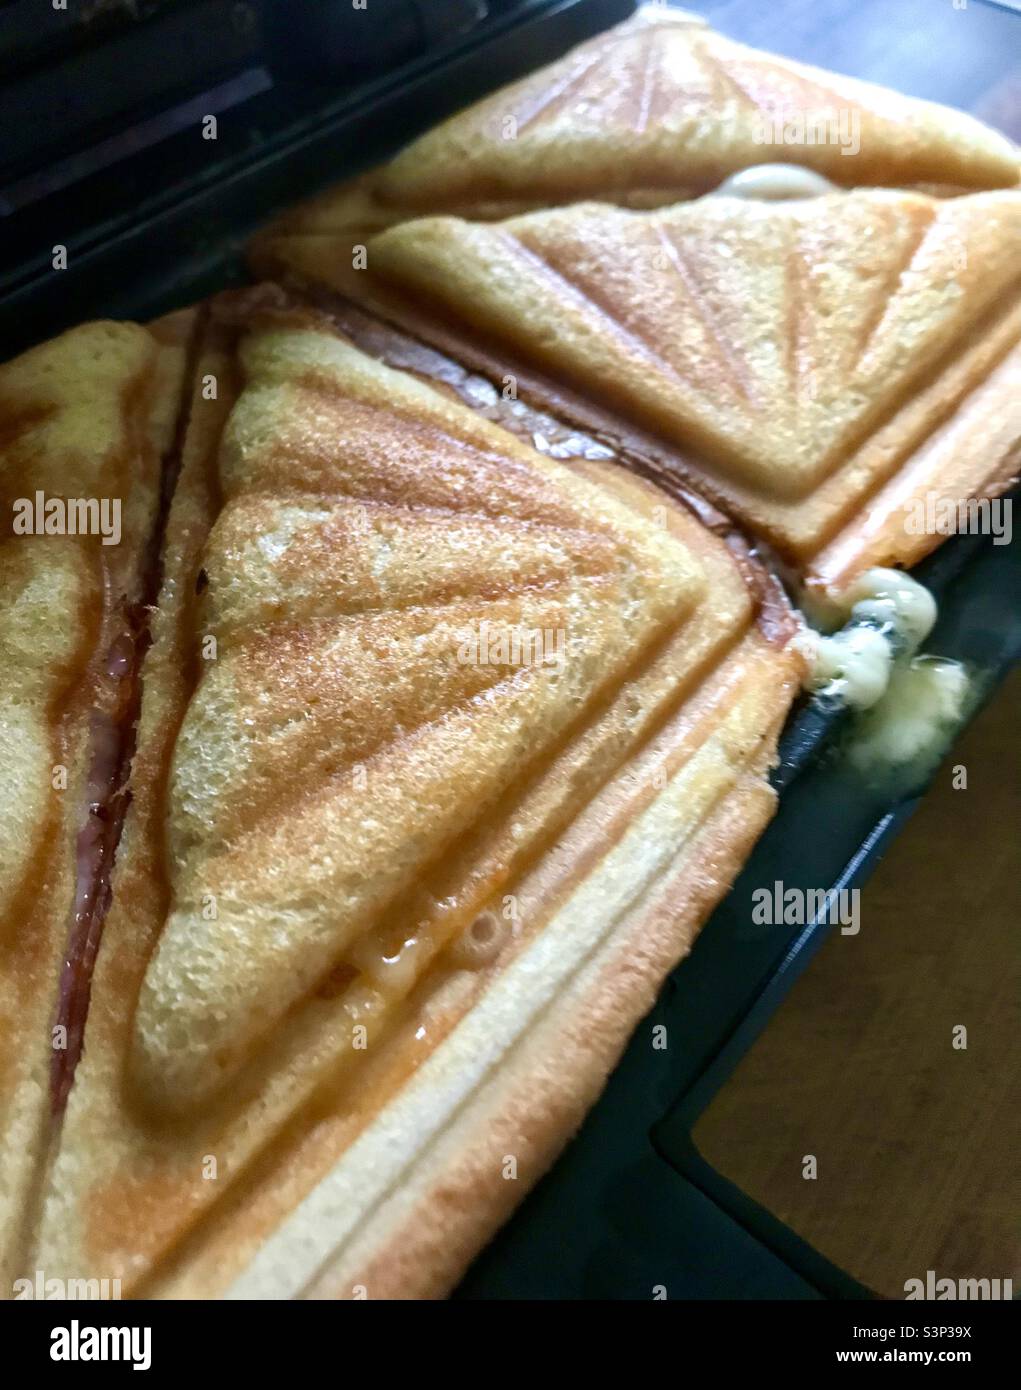 https://c8.alamy.com/comp/S3P39X/ham-and-cheese-toasted-sandwiches-freshly-made-in-a-sandwich-toaster-S3P39X.jpg